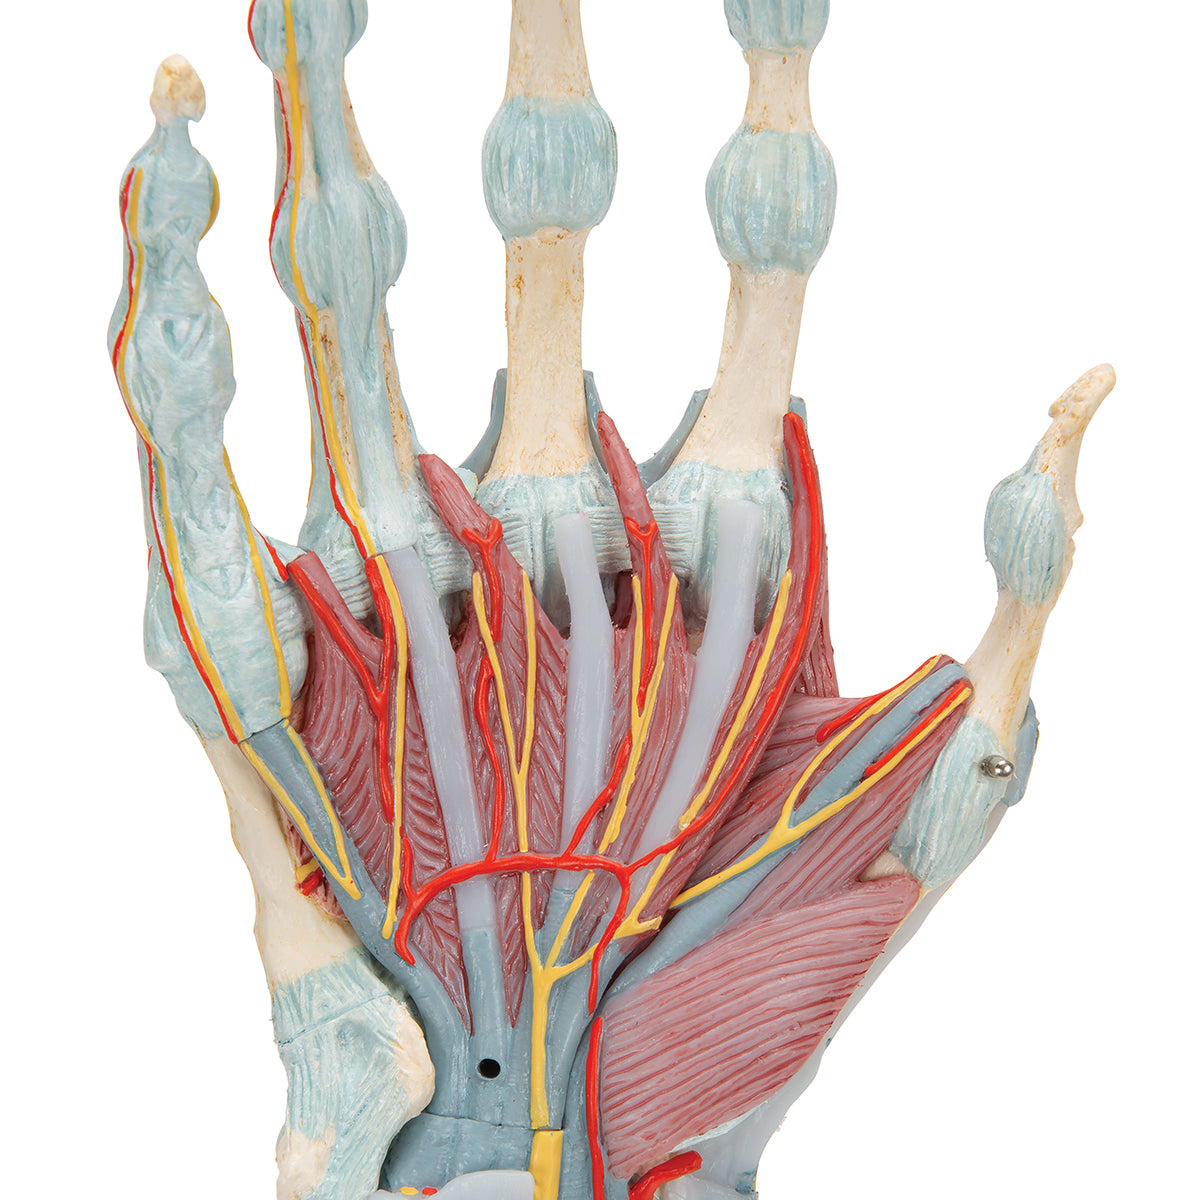 Complete hand model with ligaments, muscles, tendons, vessels and nerves - can be separated into 4 parts